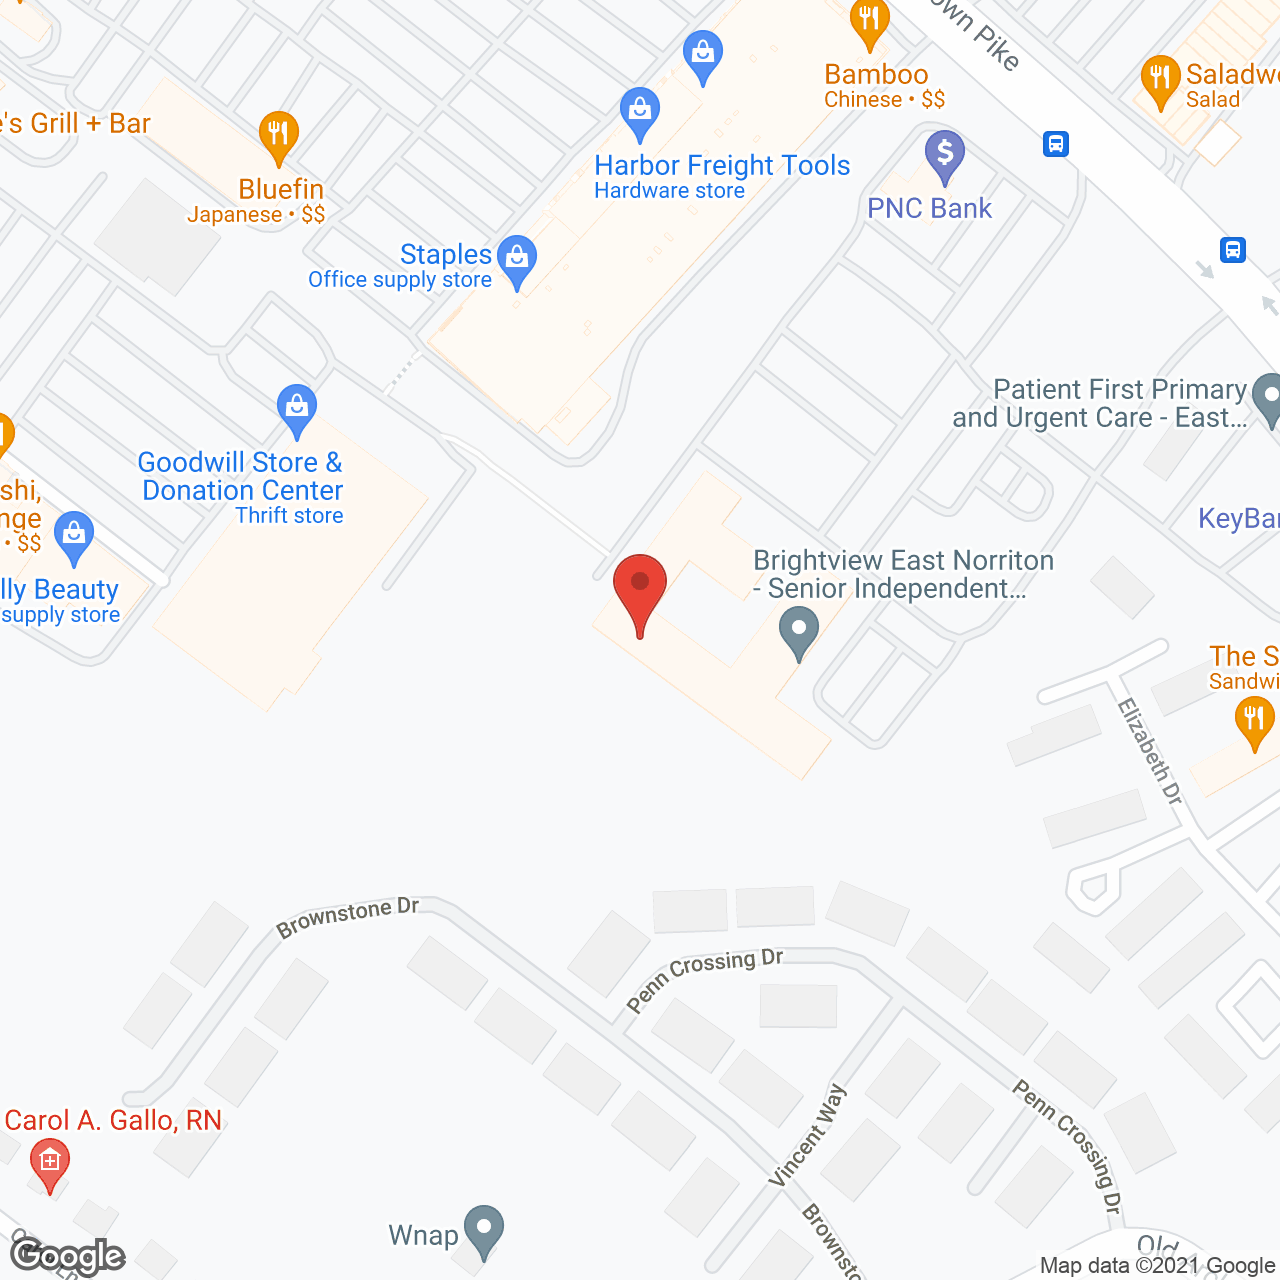 Brightview East Norriton in google map